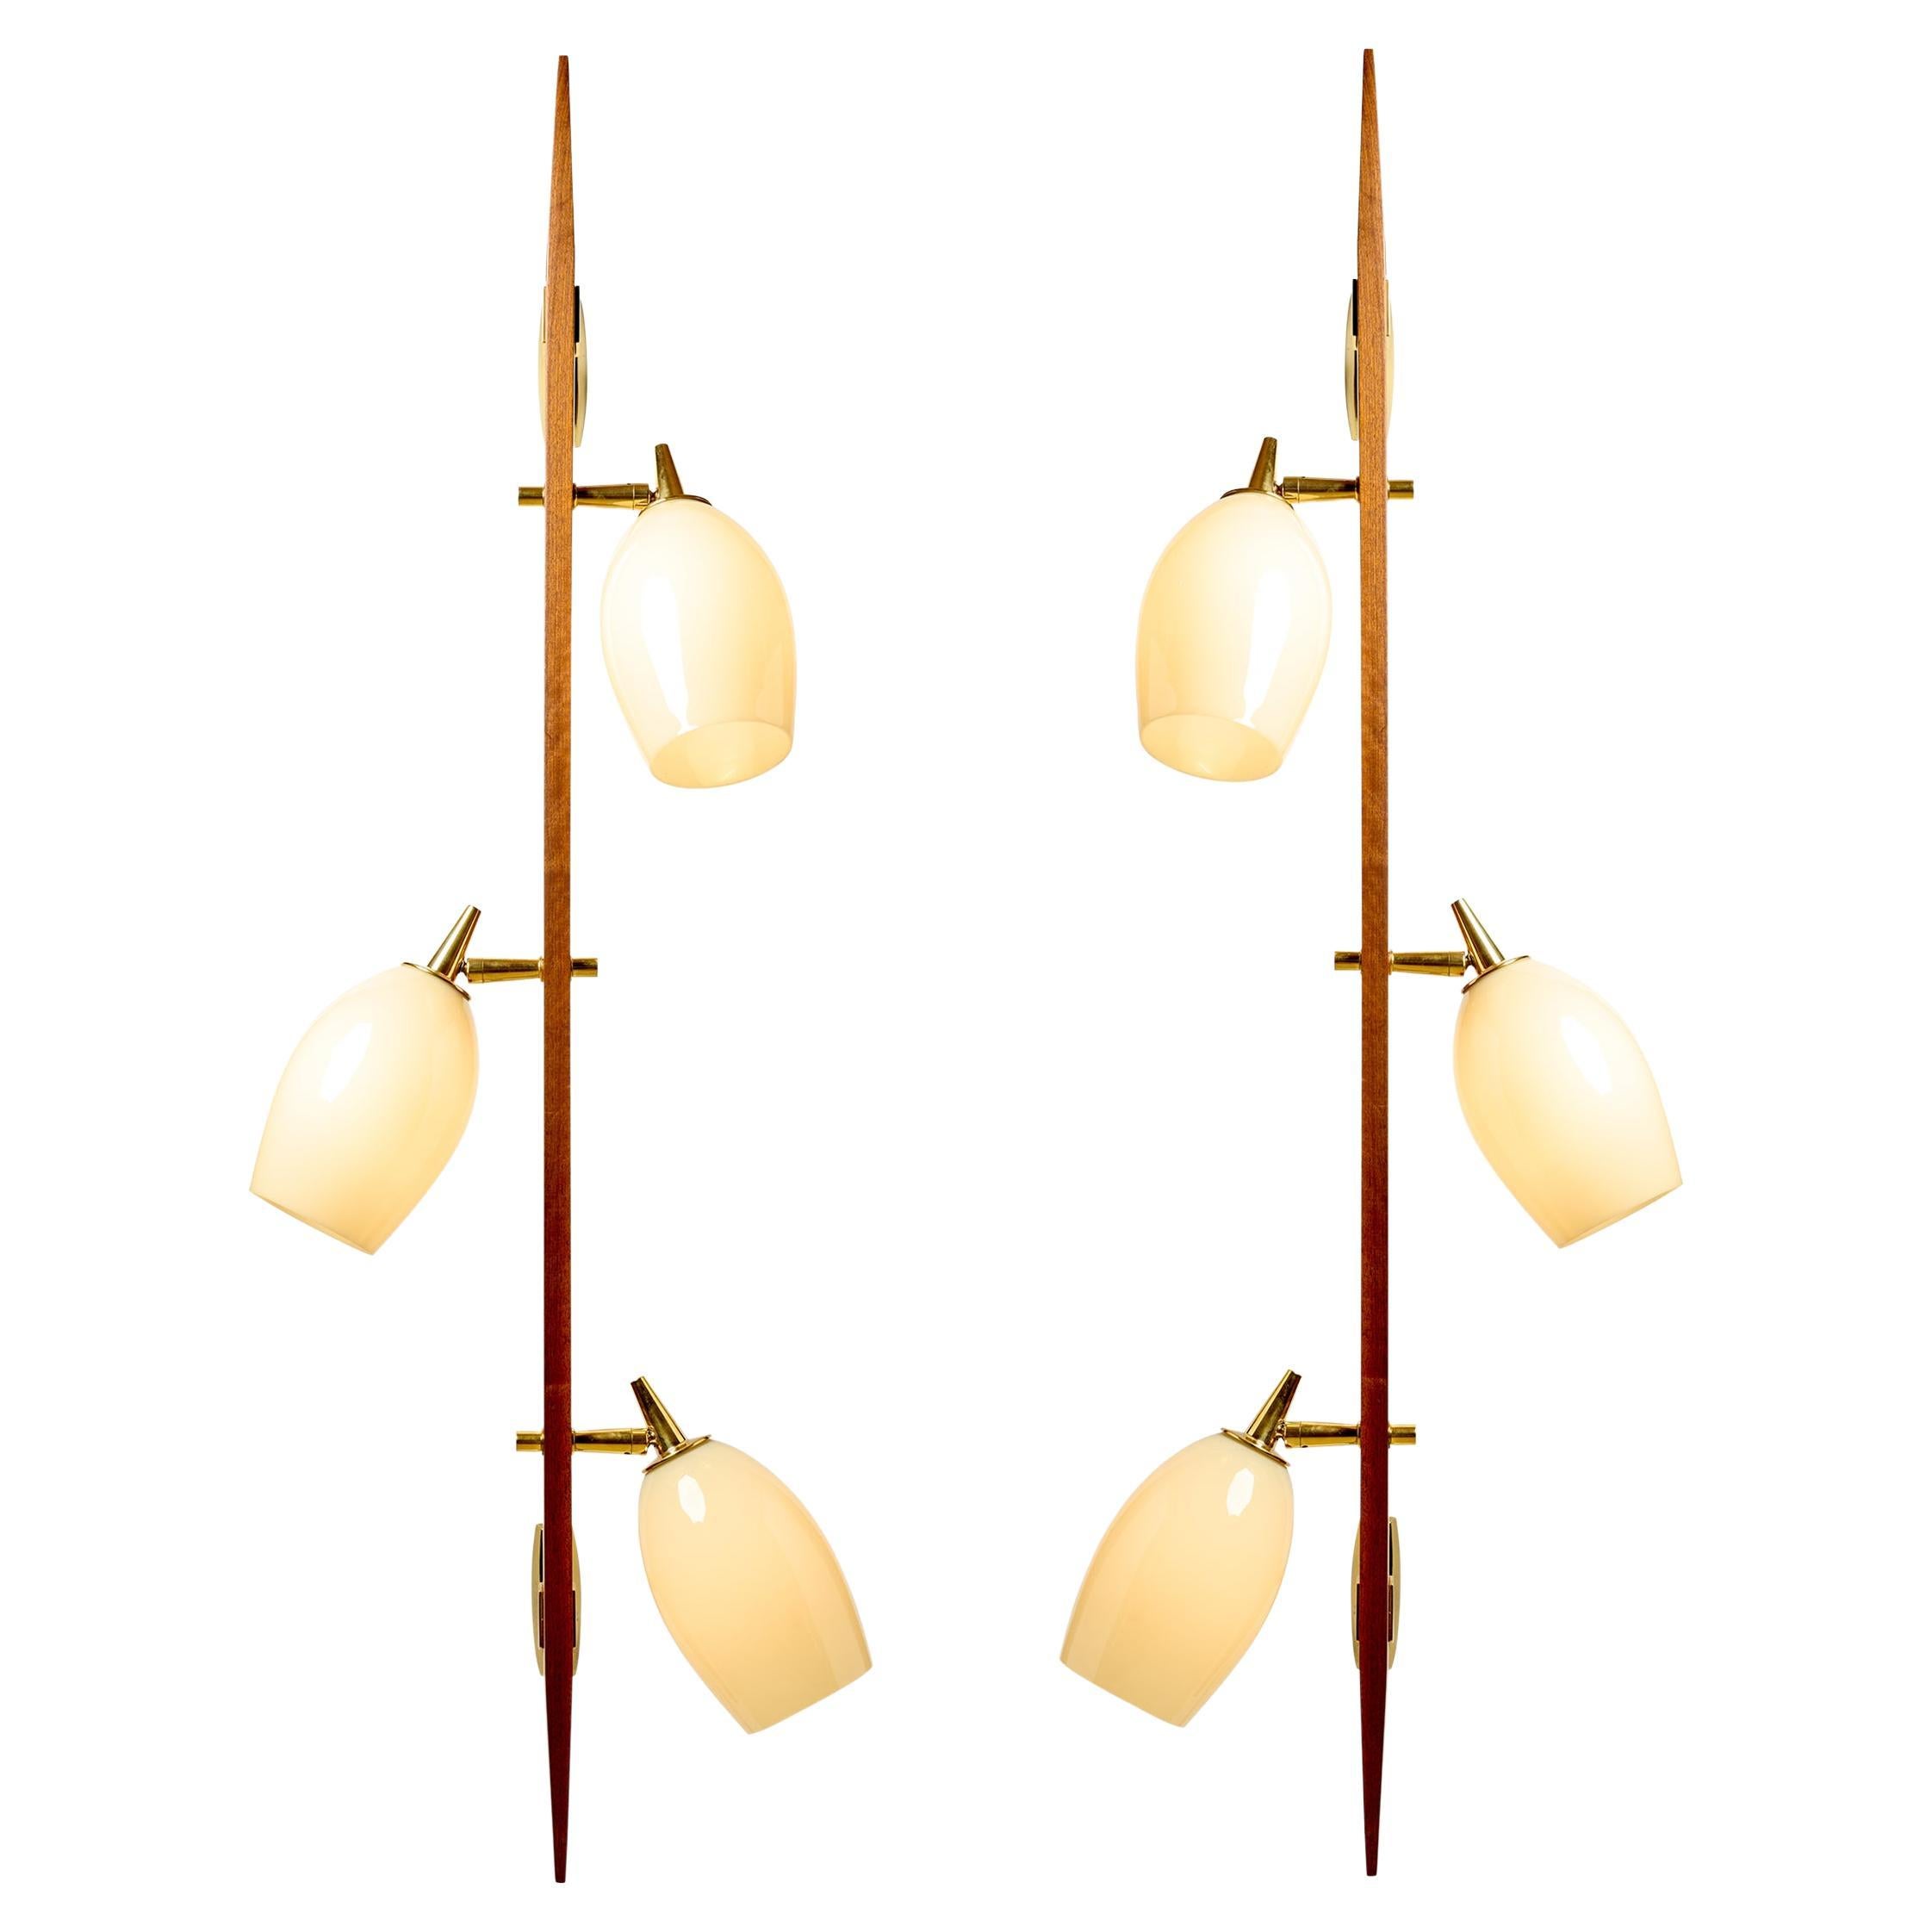 Pair of Wall Sconces in the Style of Paavo Tynell, 1950s For Sale